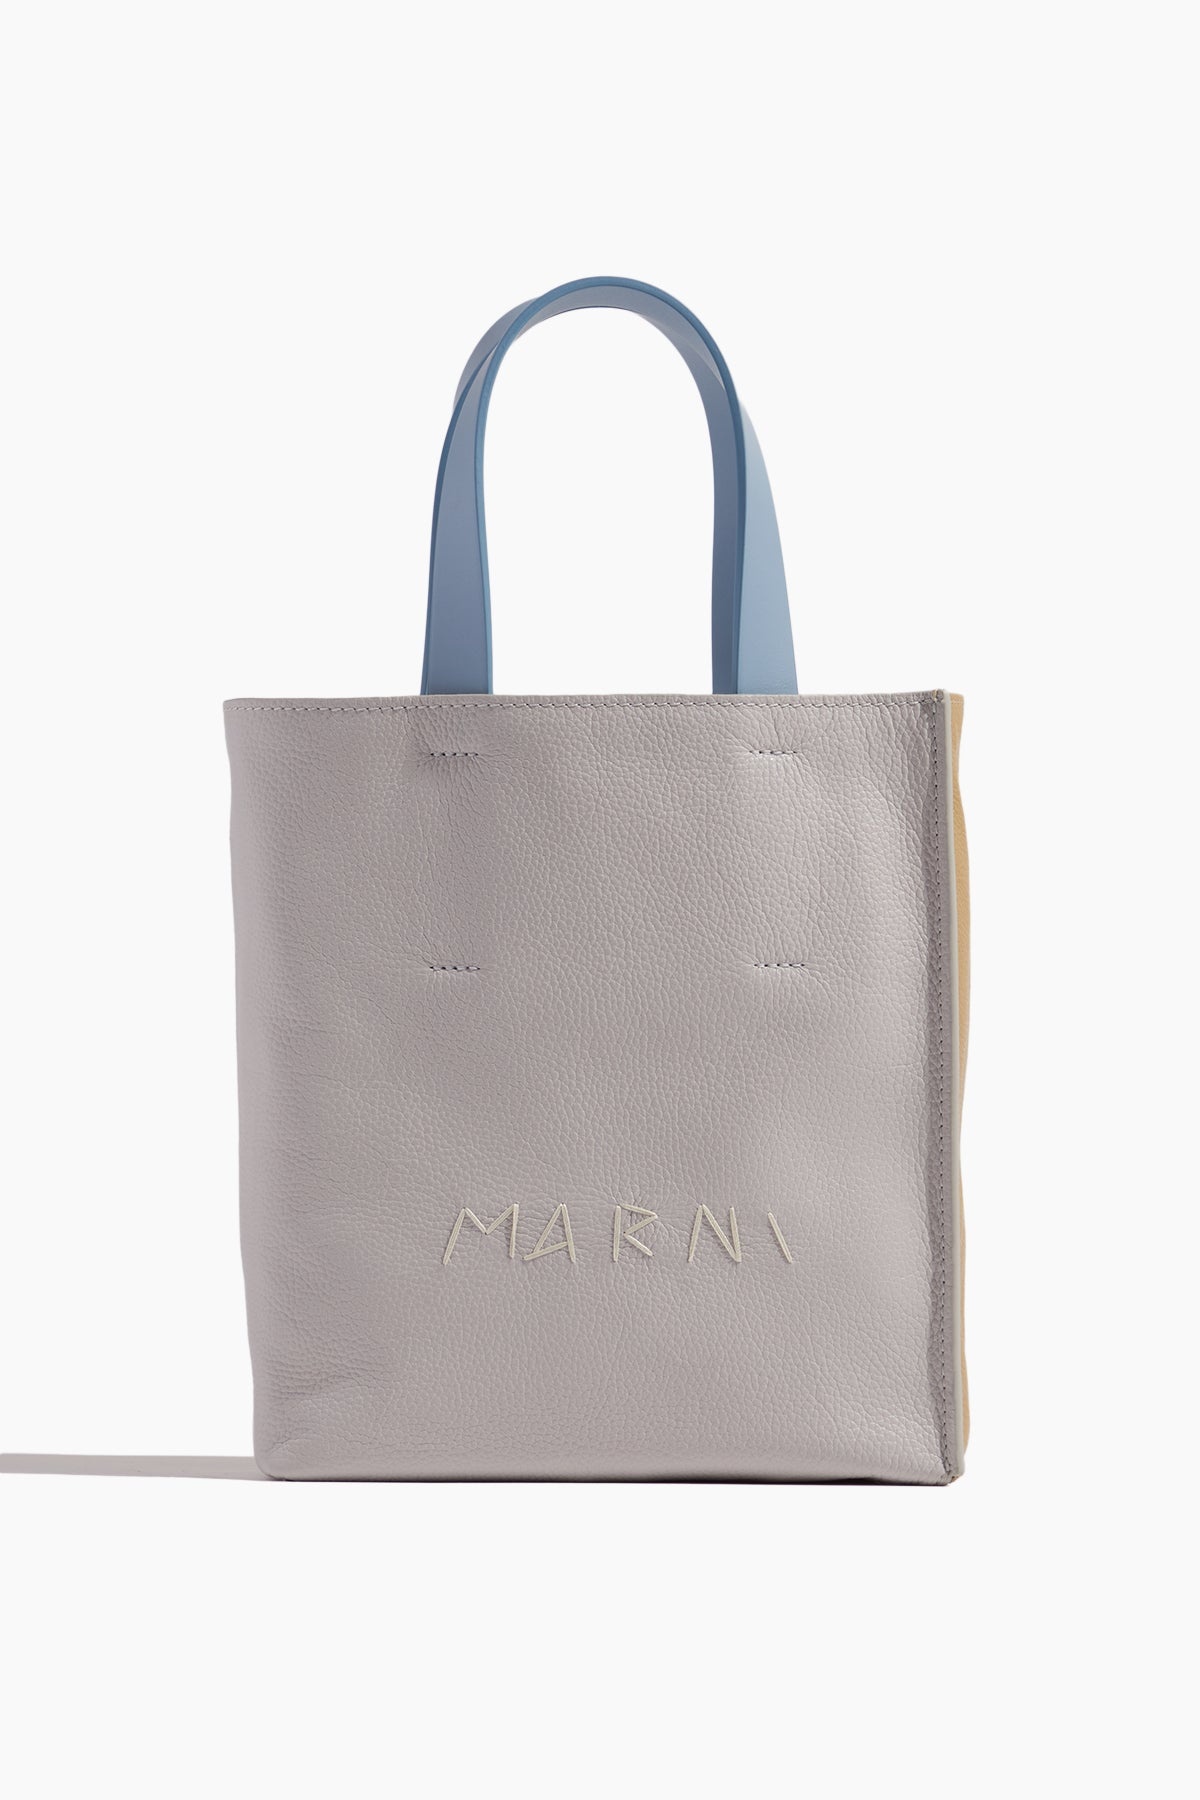 Museo Soft Mini Tote in Sodium/Nomad/Dusty Blue - 1